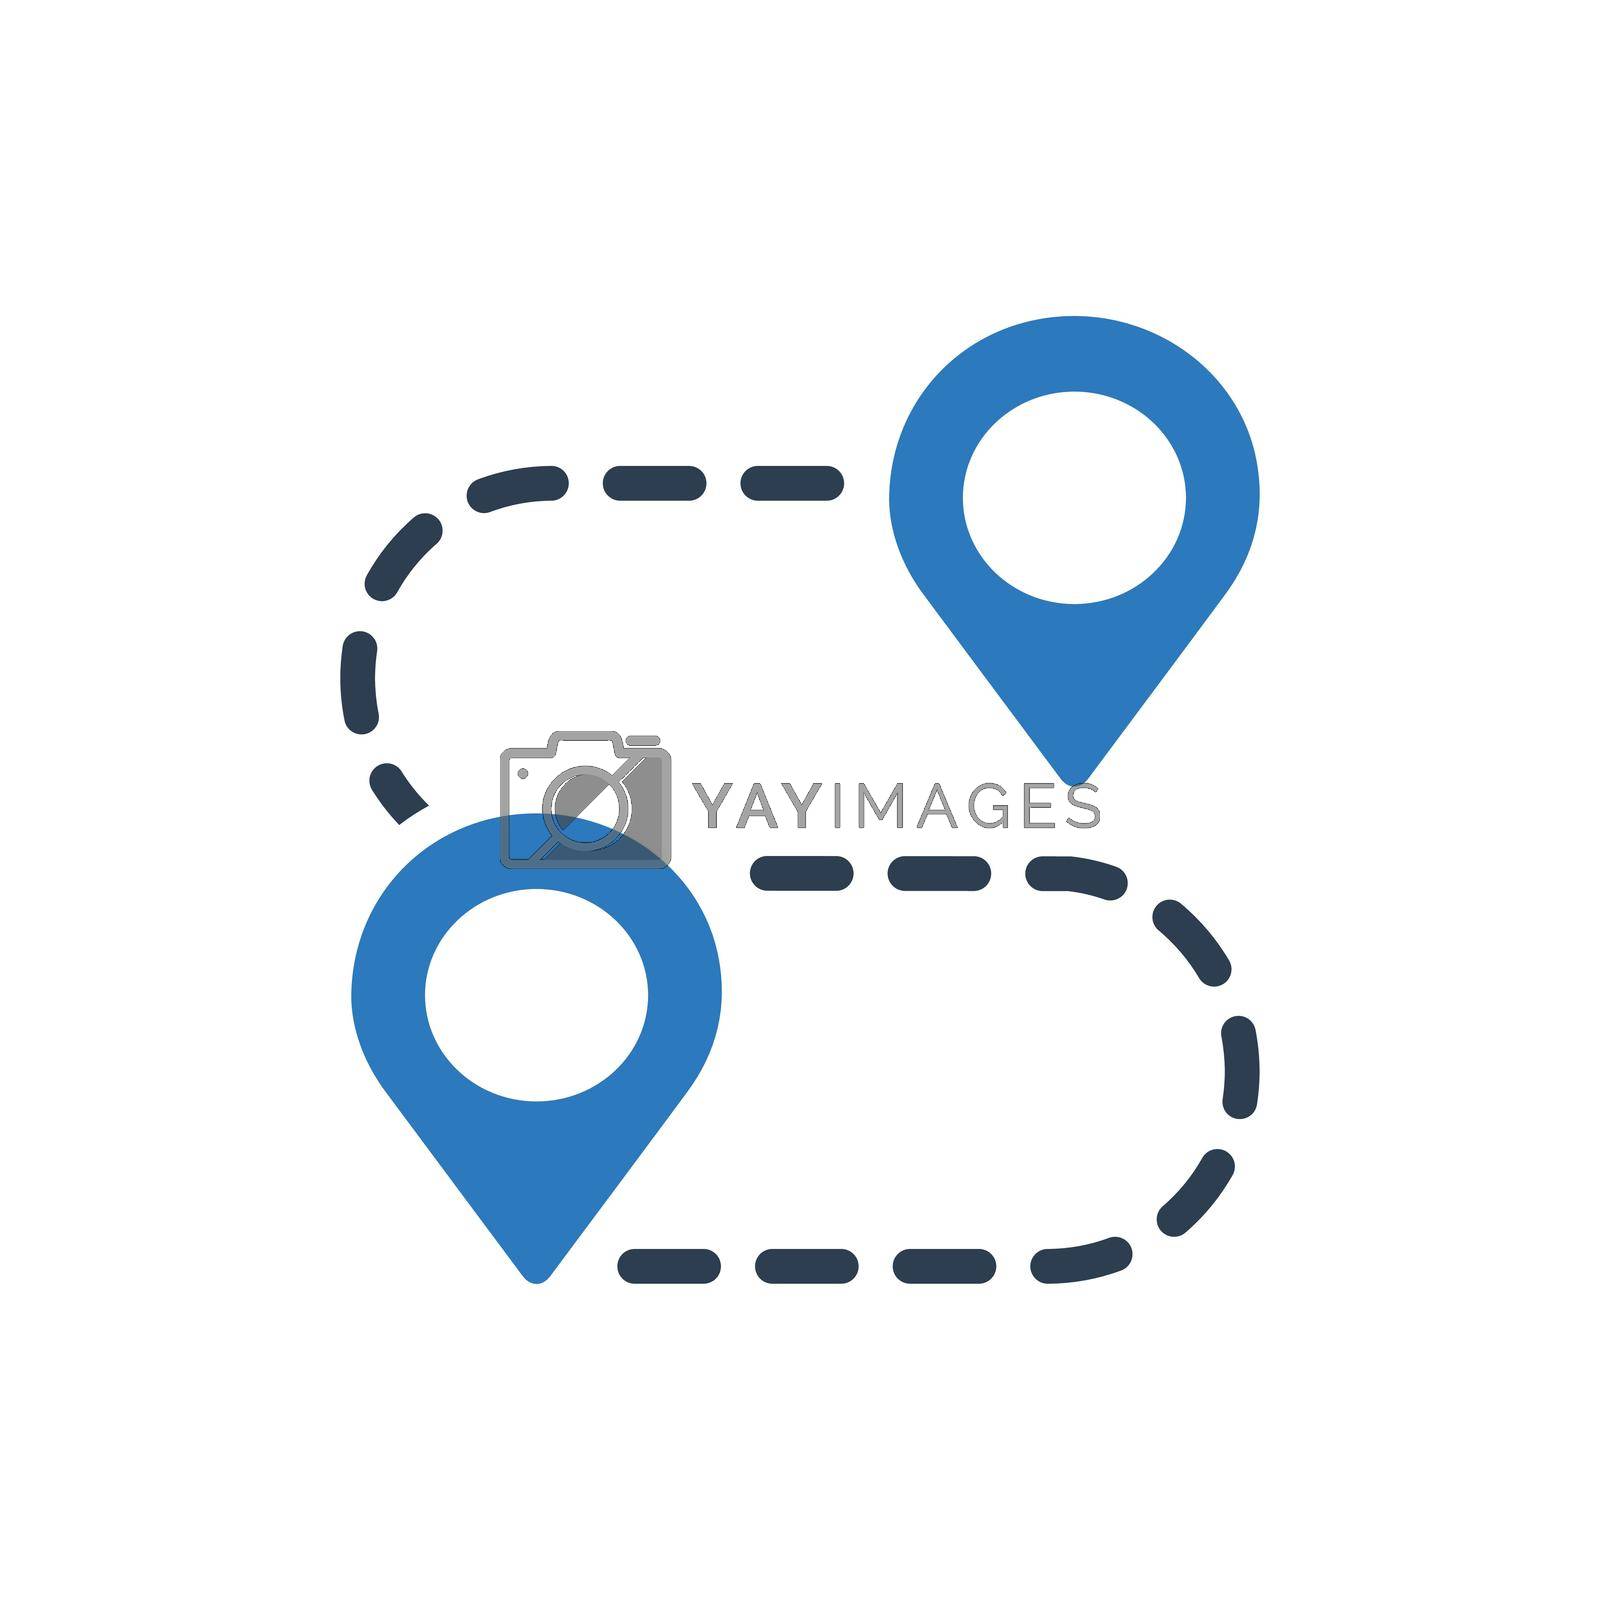 Royalty free image of Travel Direction Icon by delwar018